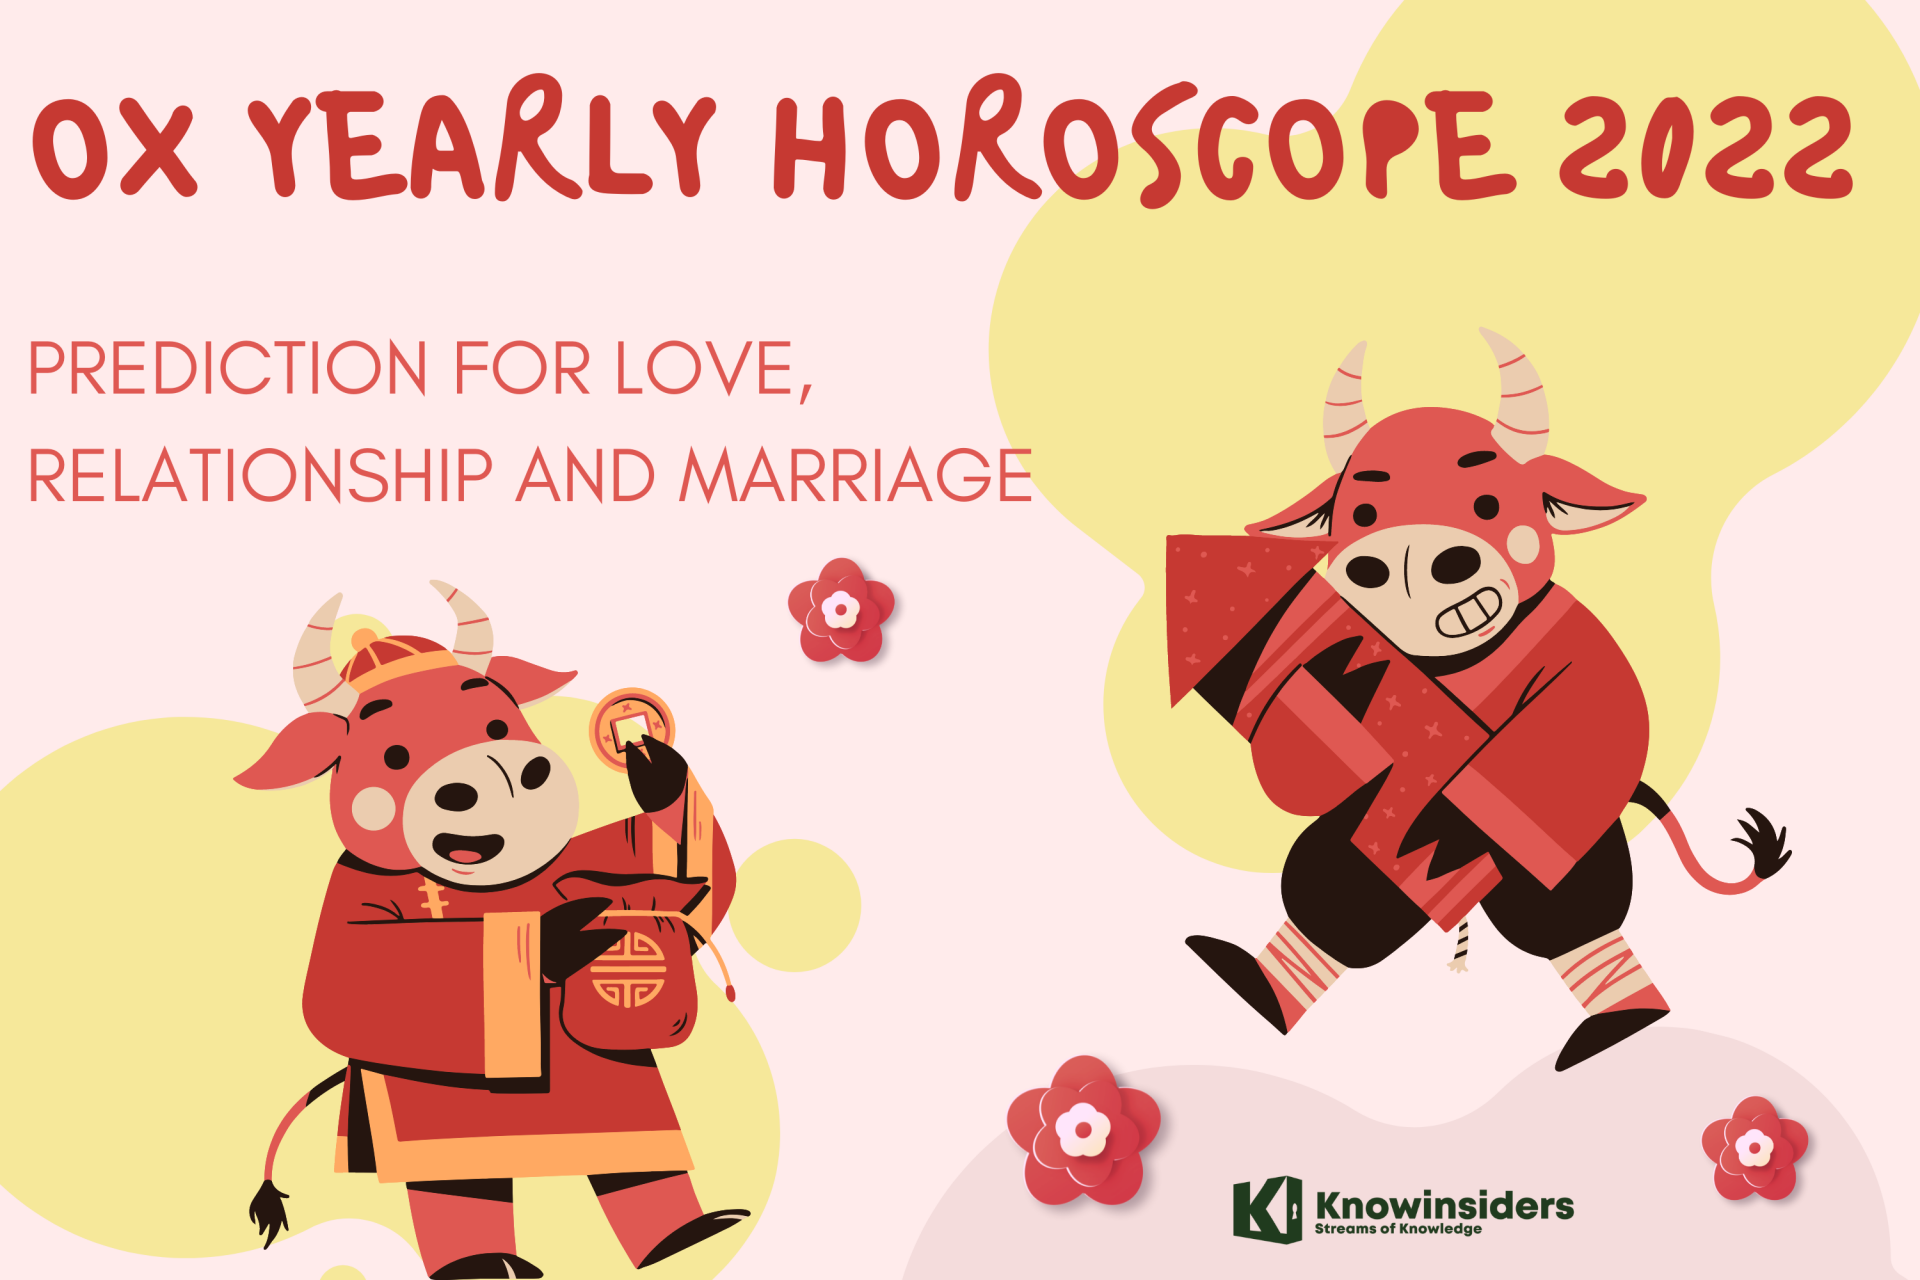 ox yearly horoscope 2022 feng shui prediction for love relationship and marriage